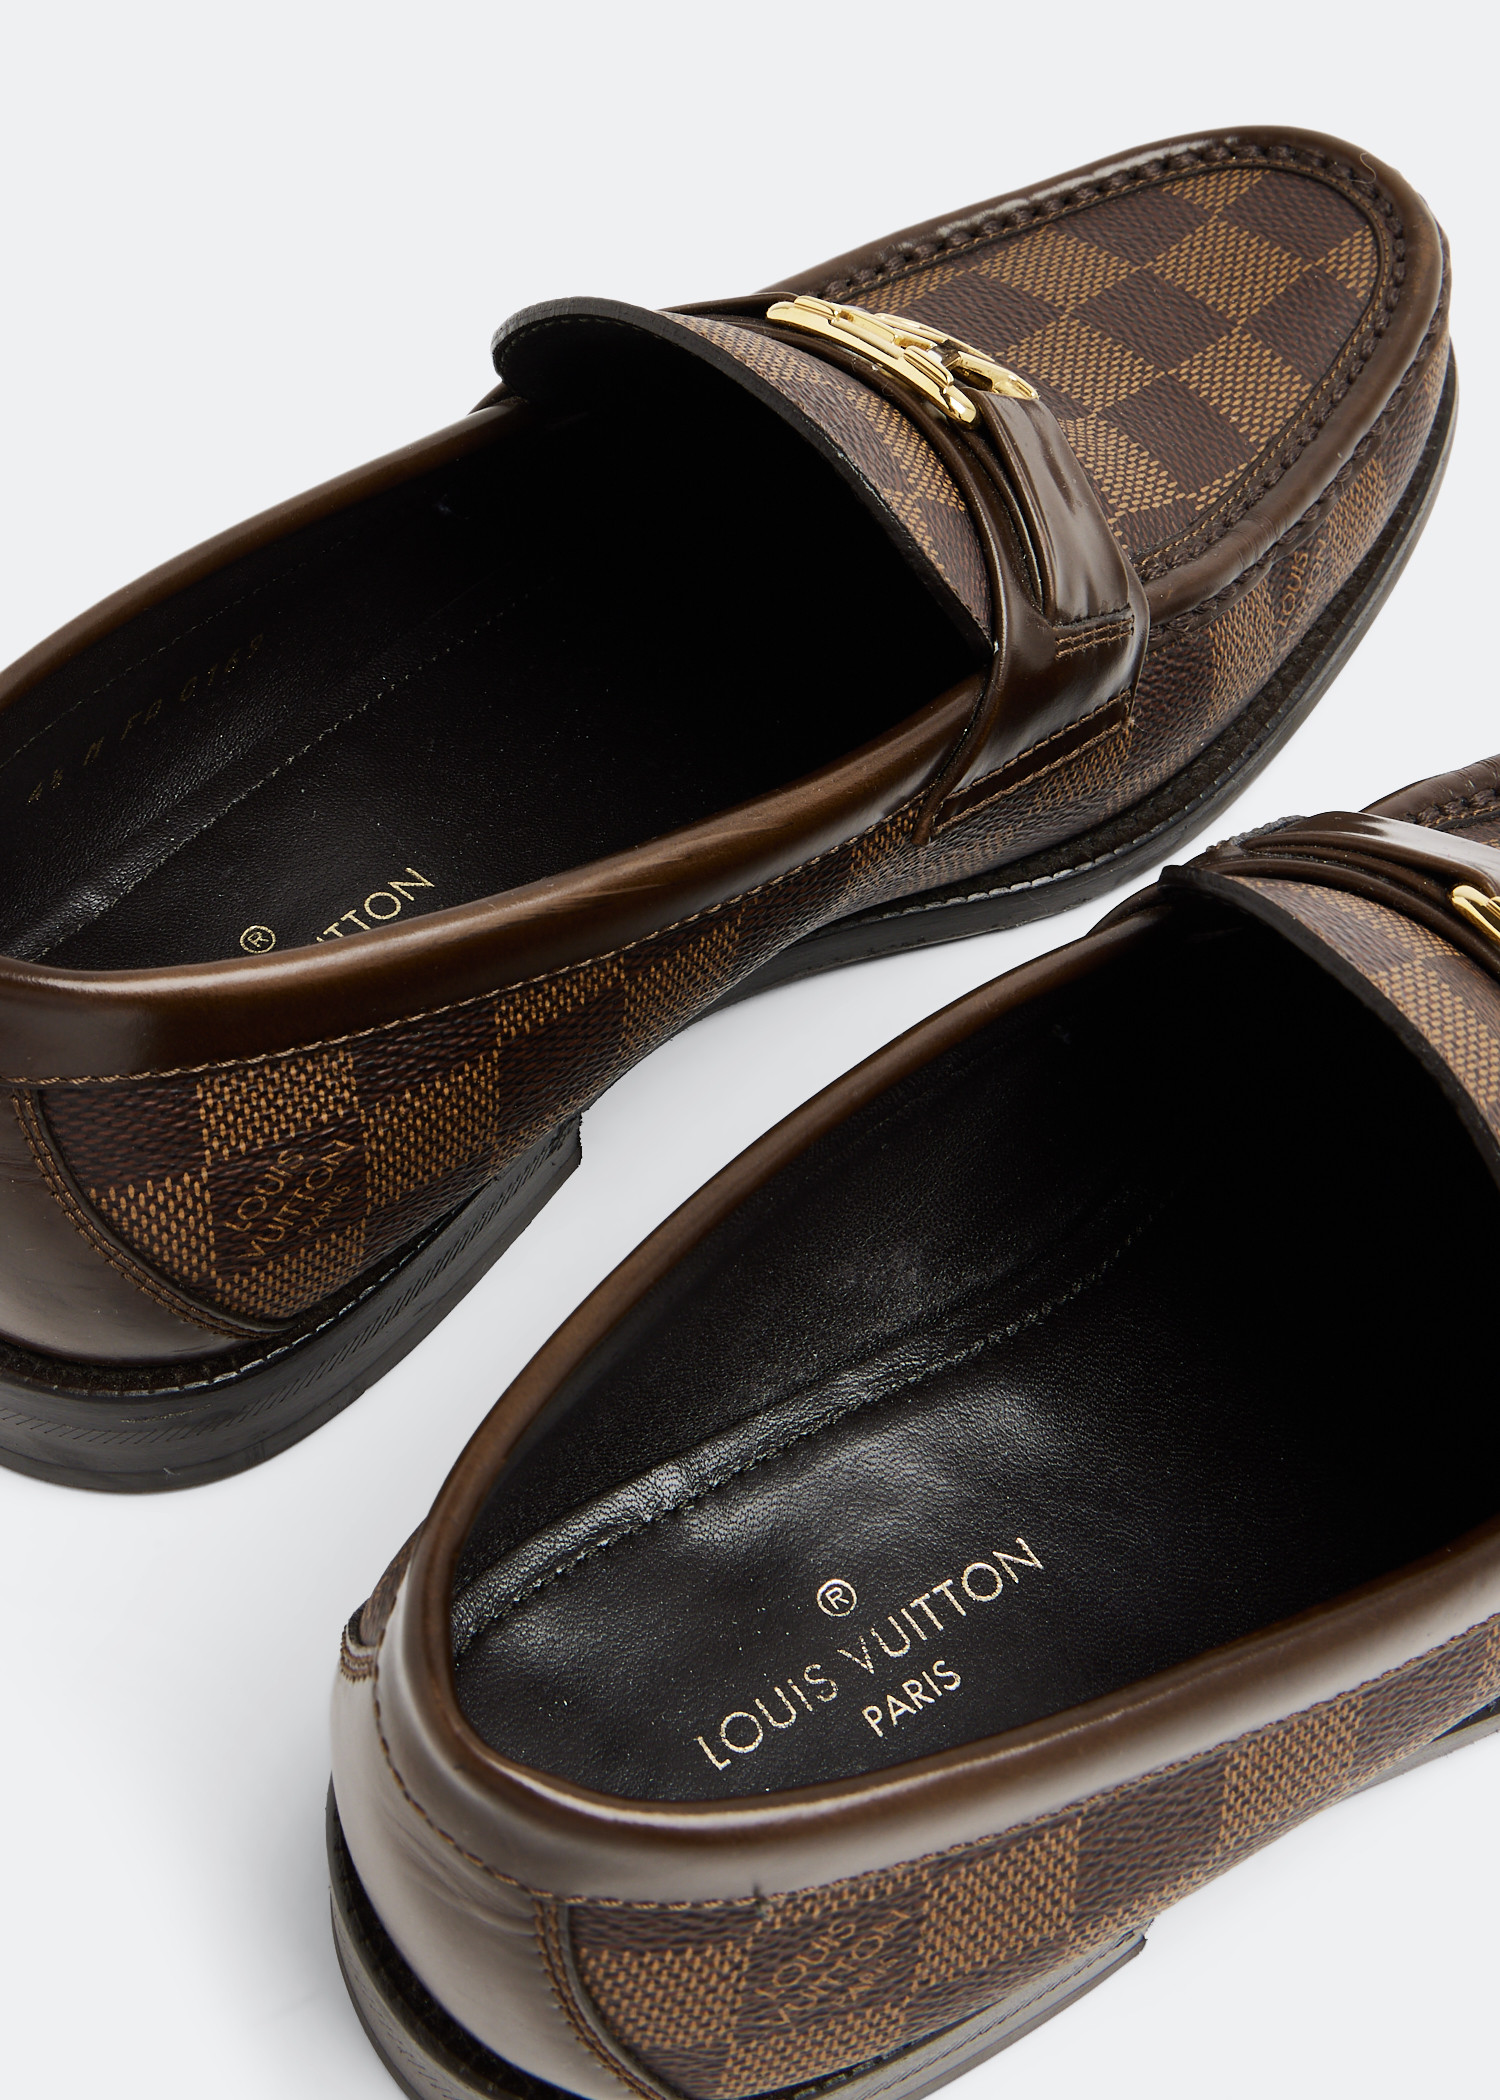 Louis Vuitton Major Loafer BROWN. Size 08.5